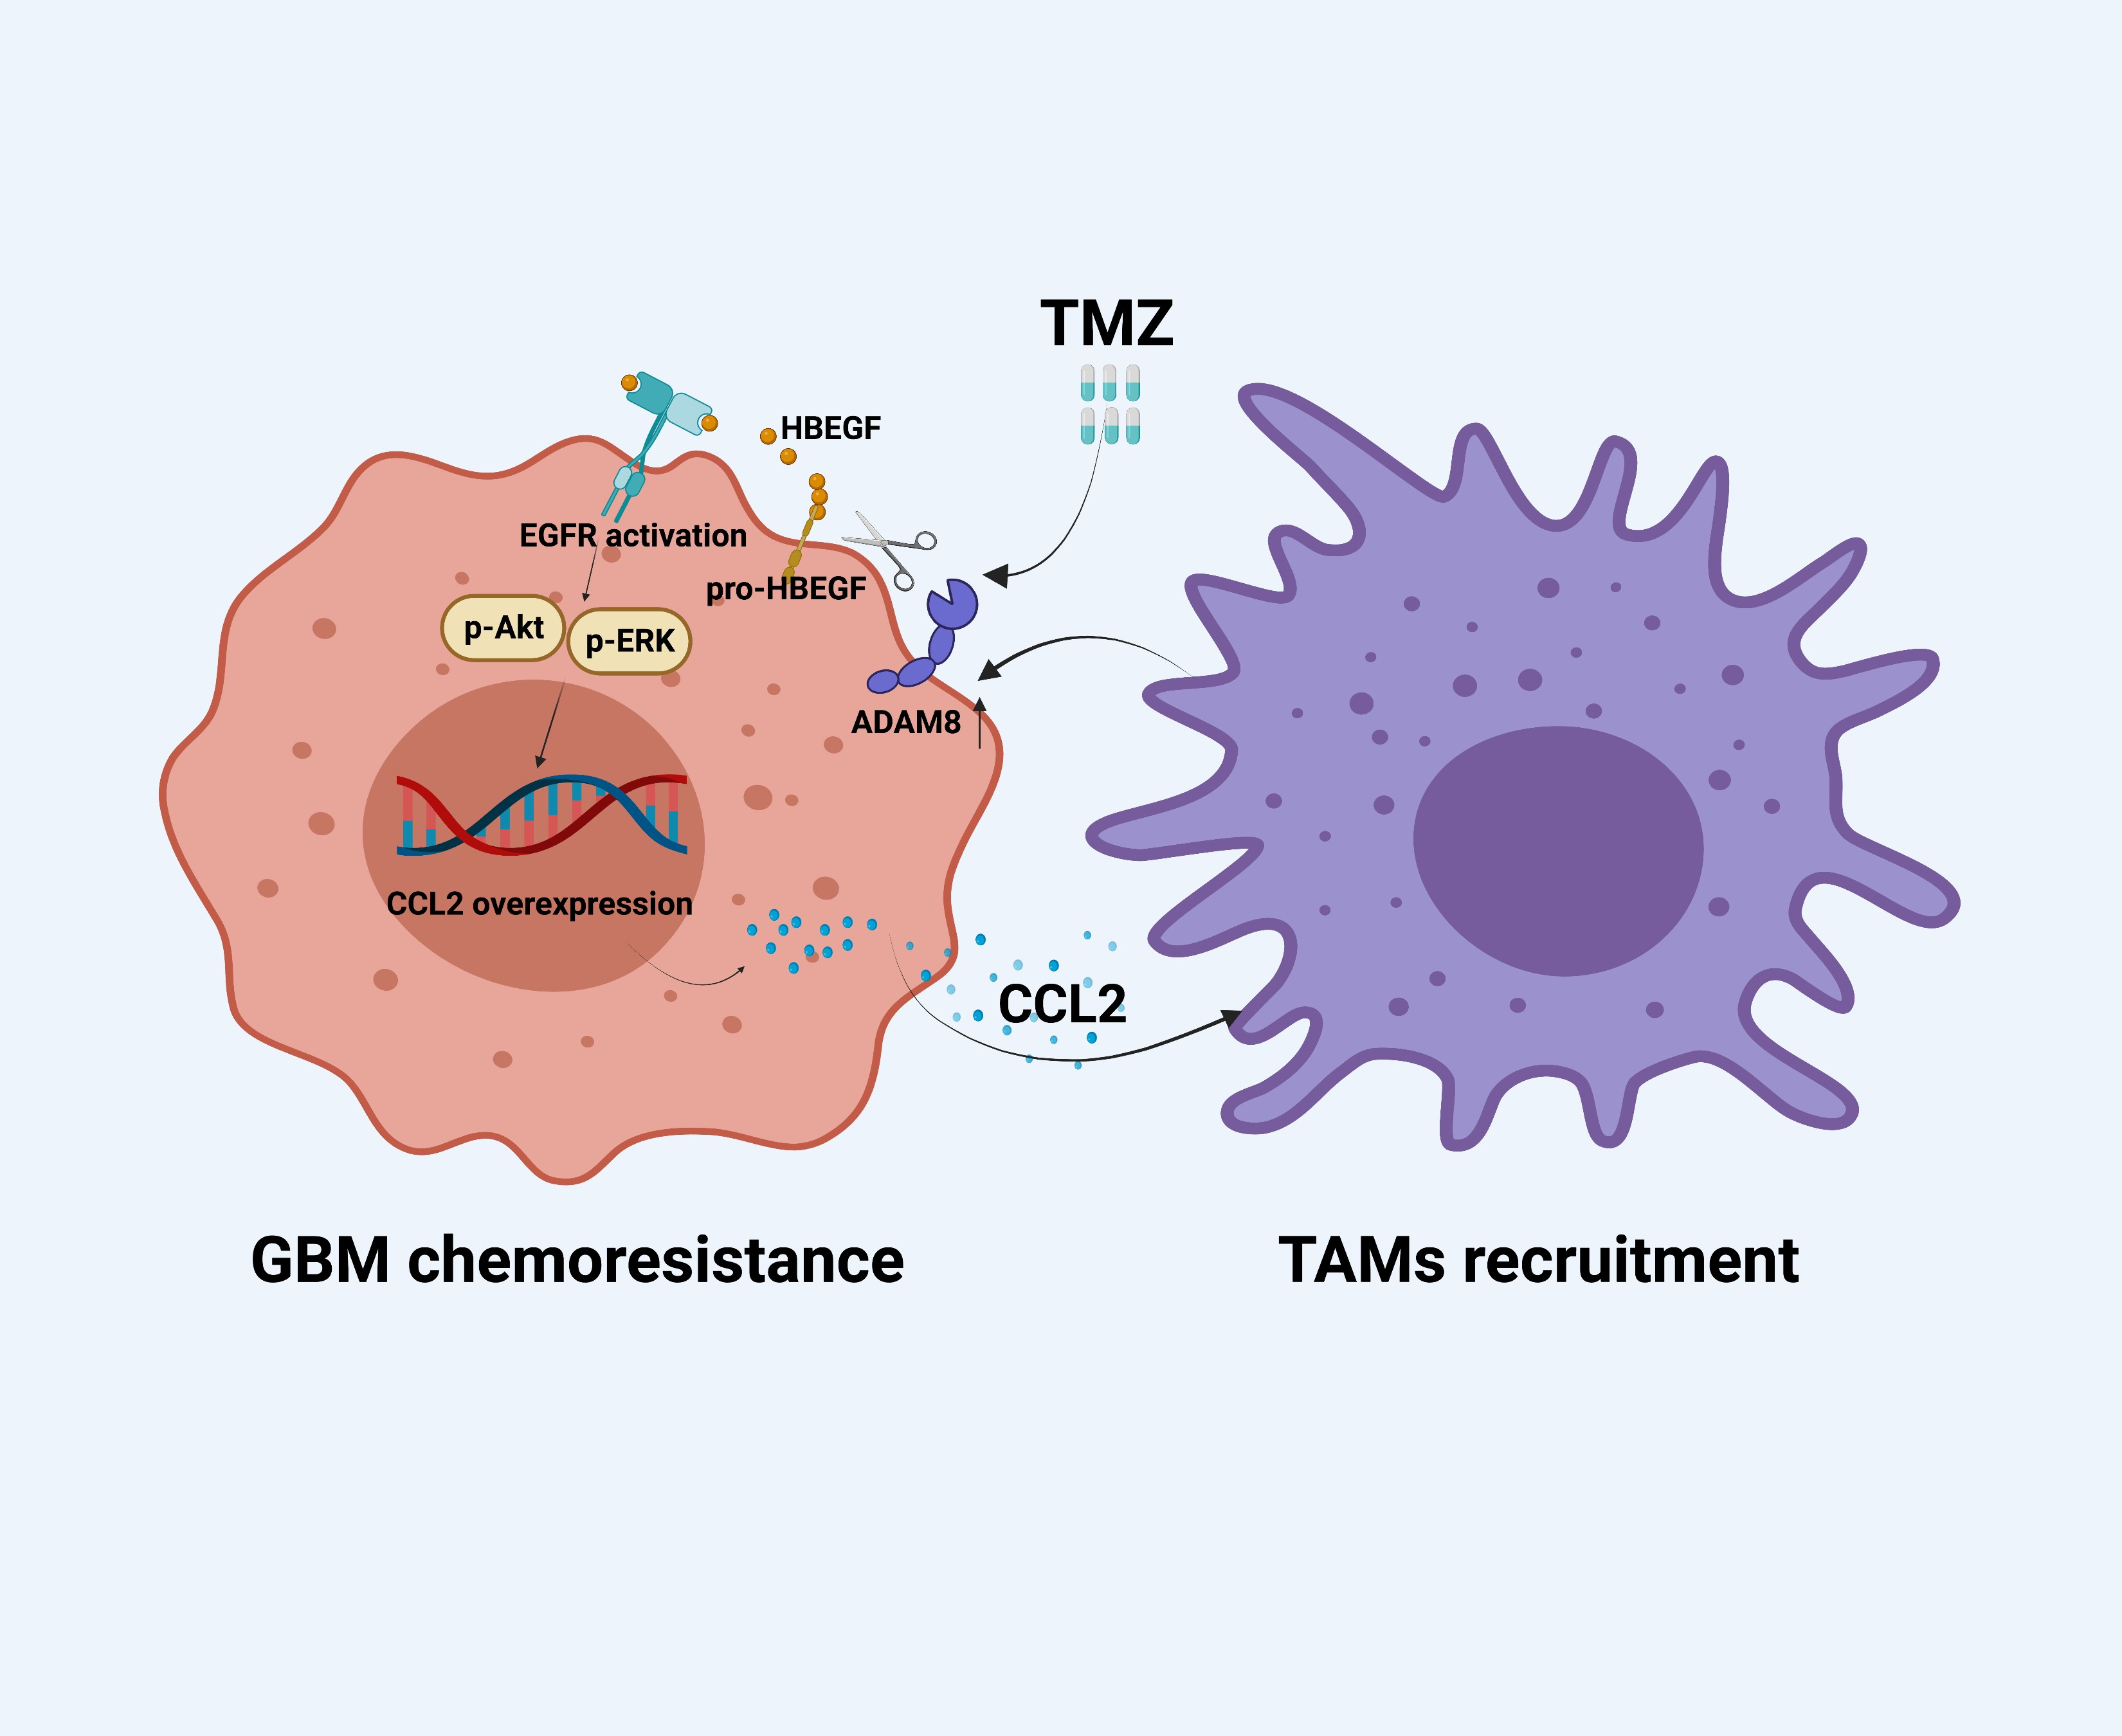 Cancers | Free Full-Text | The GBM Tumor Microenvironment as a Modulator of  Therapy Response: ADAM8 Causes Tumor Infiltration of Tams through  HB-EGF/EGFR-Mediated CCL2 Expression and Overcomes TMZ Chemosensitization  in Glioblastoma